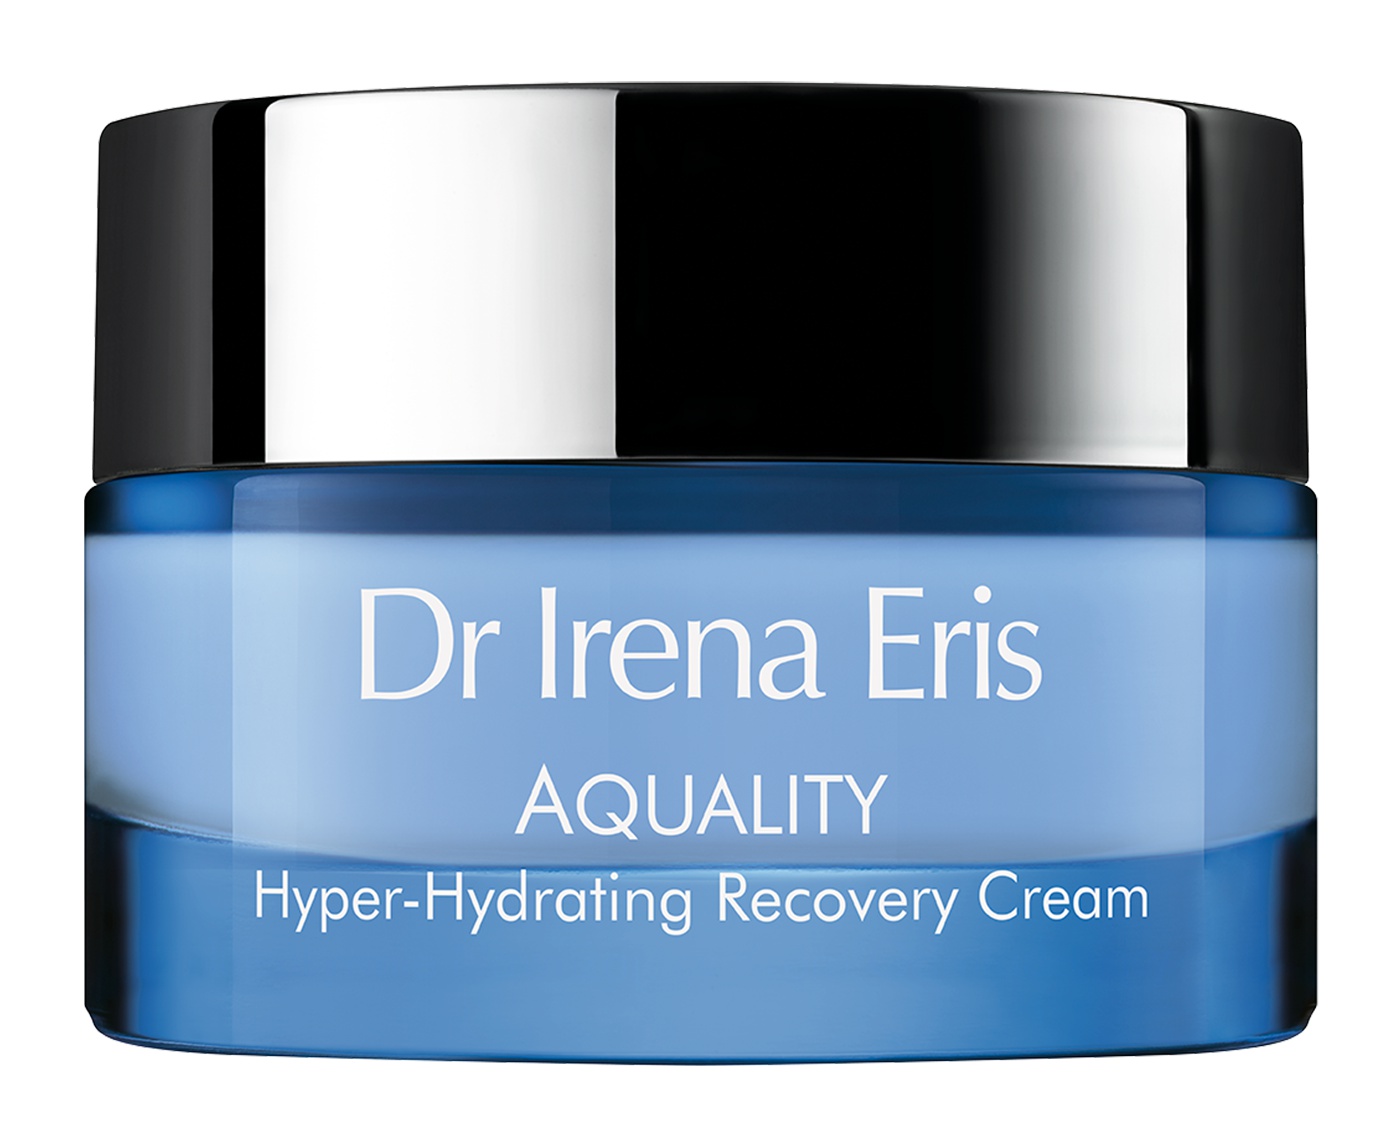 Dr Irena Eris Aquality Hyper-Hydrating Recovery Cream